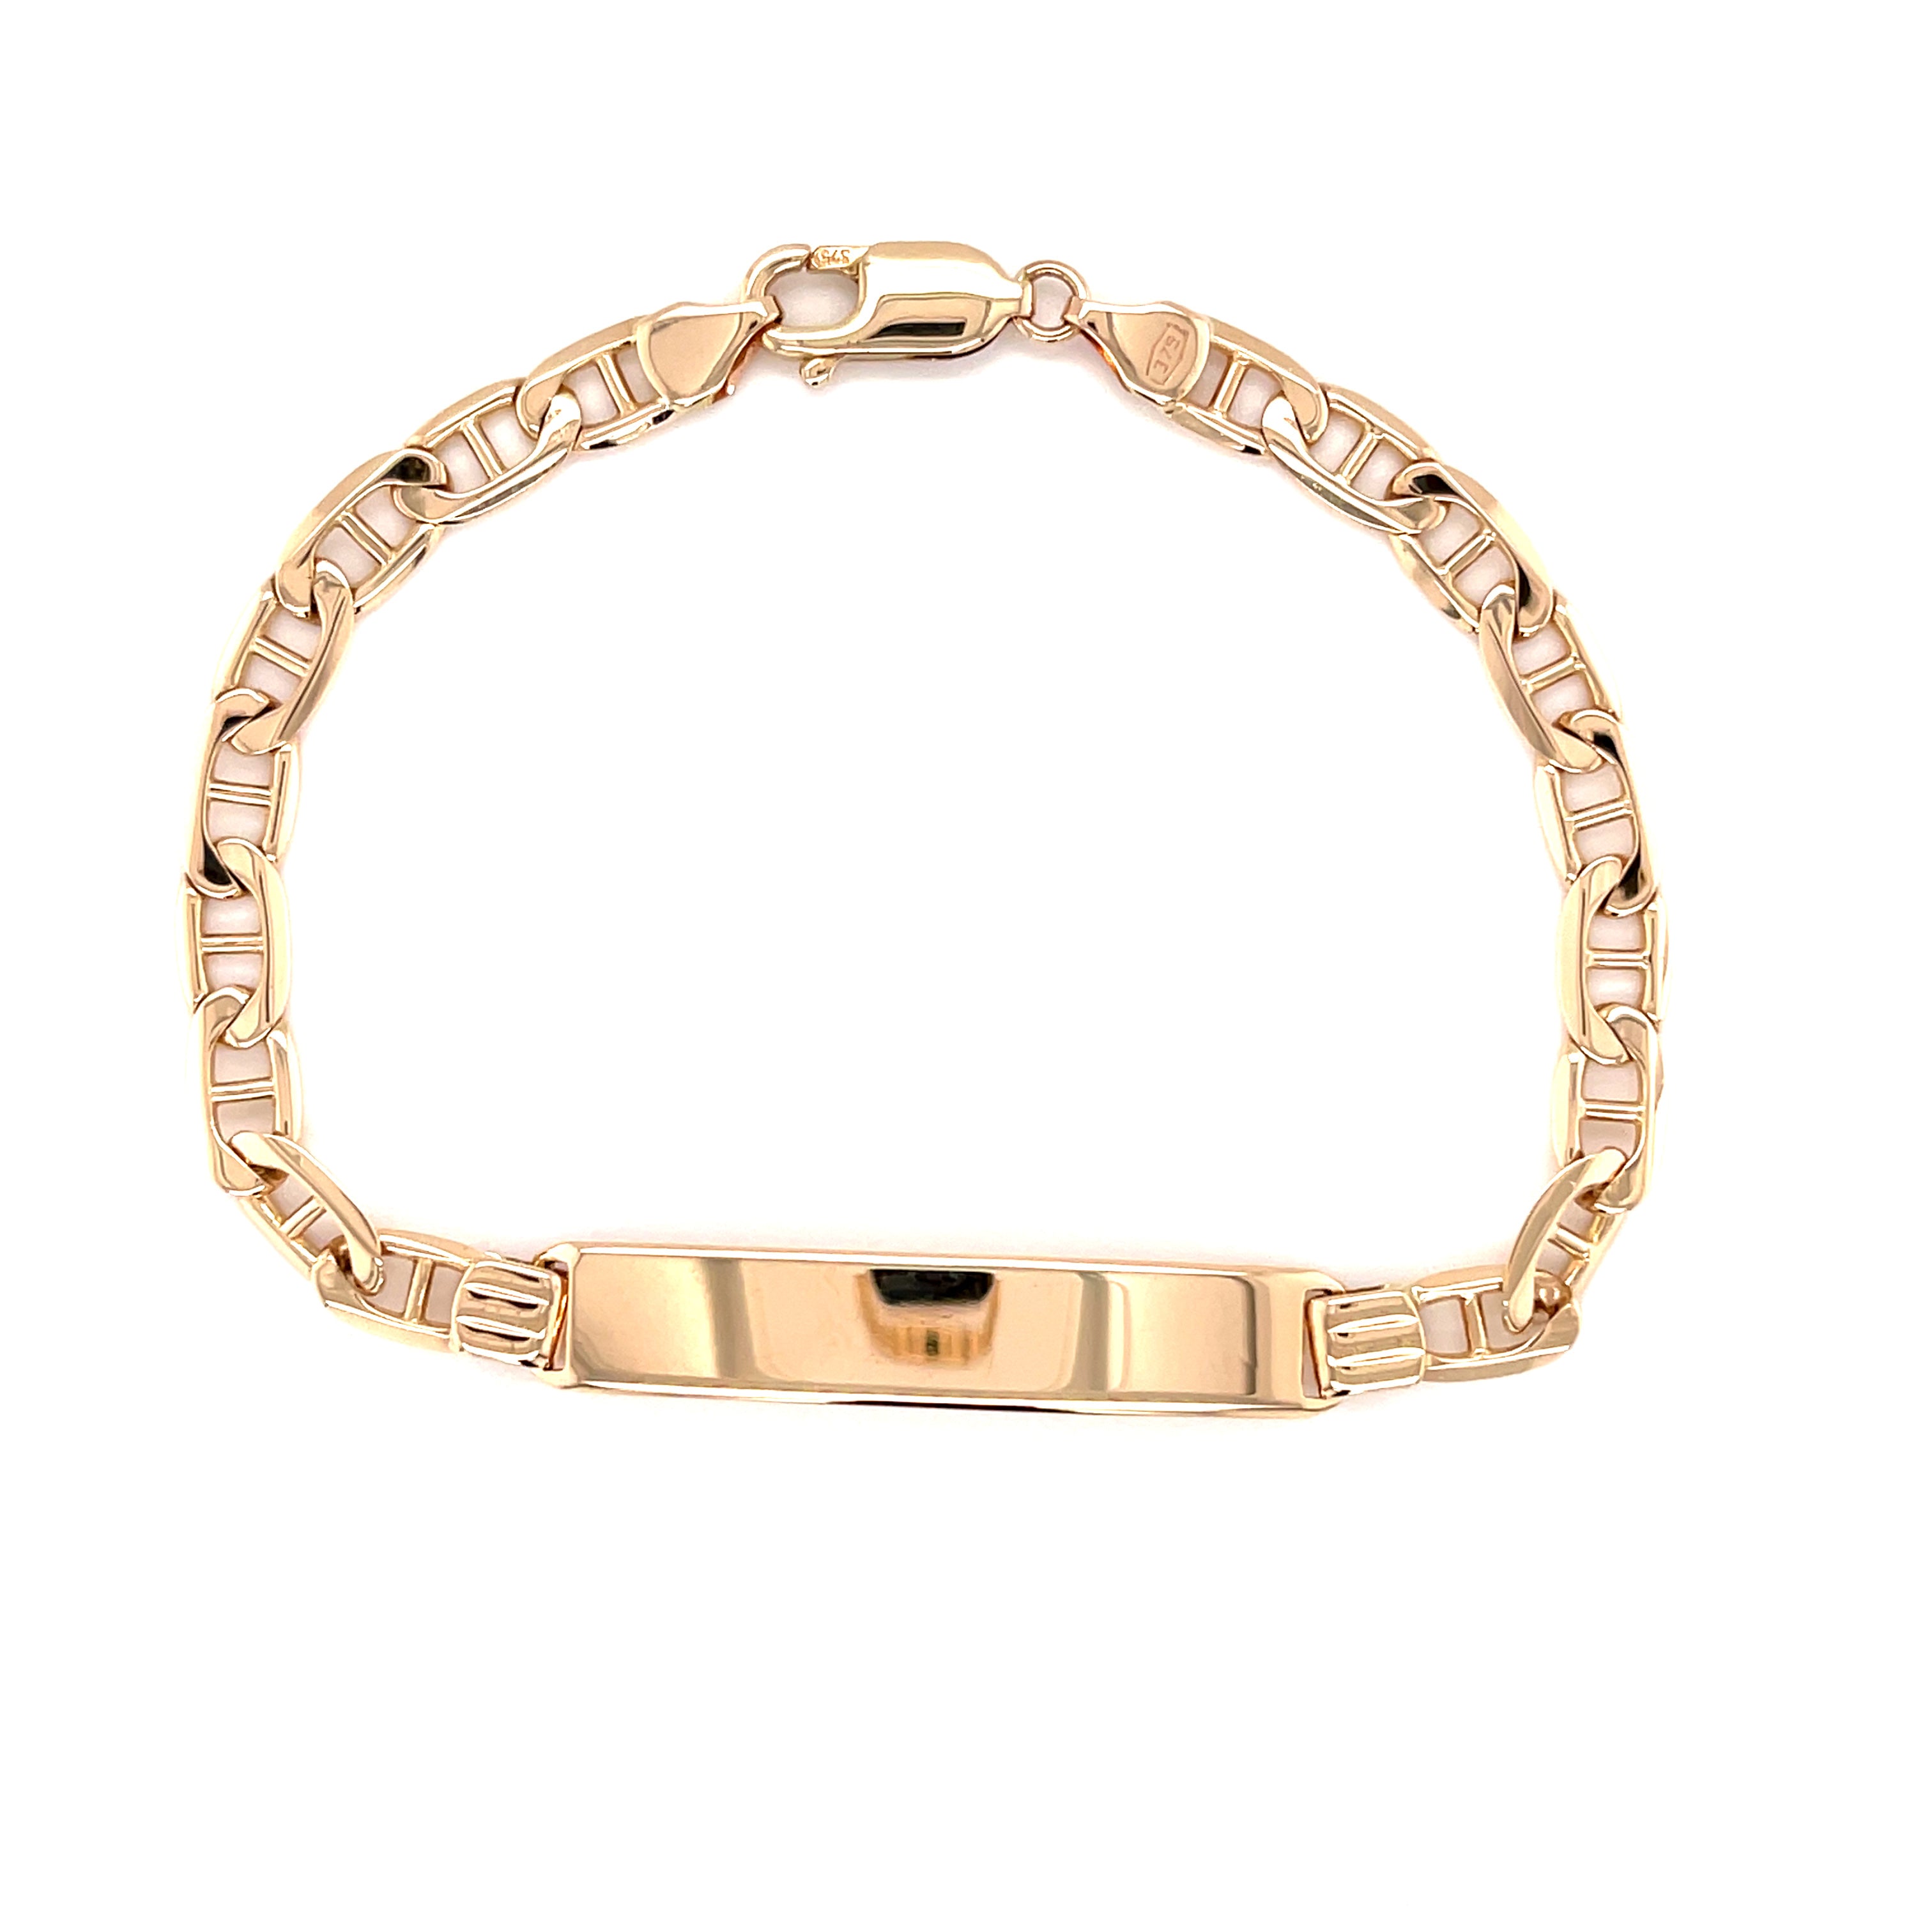 9ct Yellow Gold 7.5" Anchor Link Identity Bracelet - 8.00g SOLD